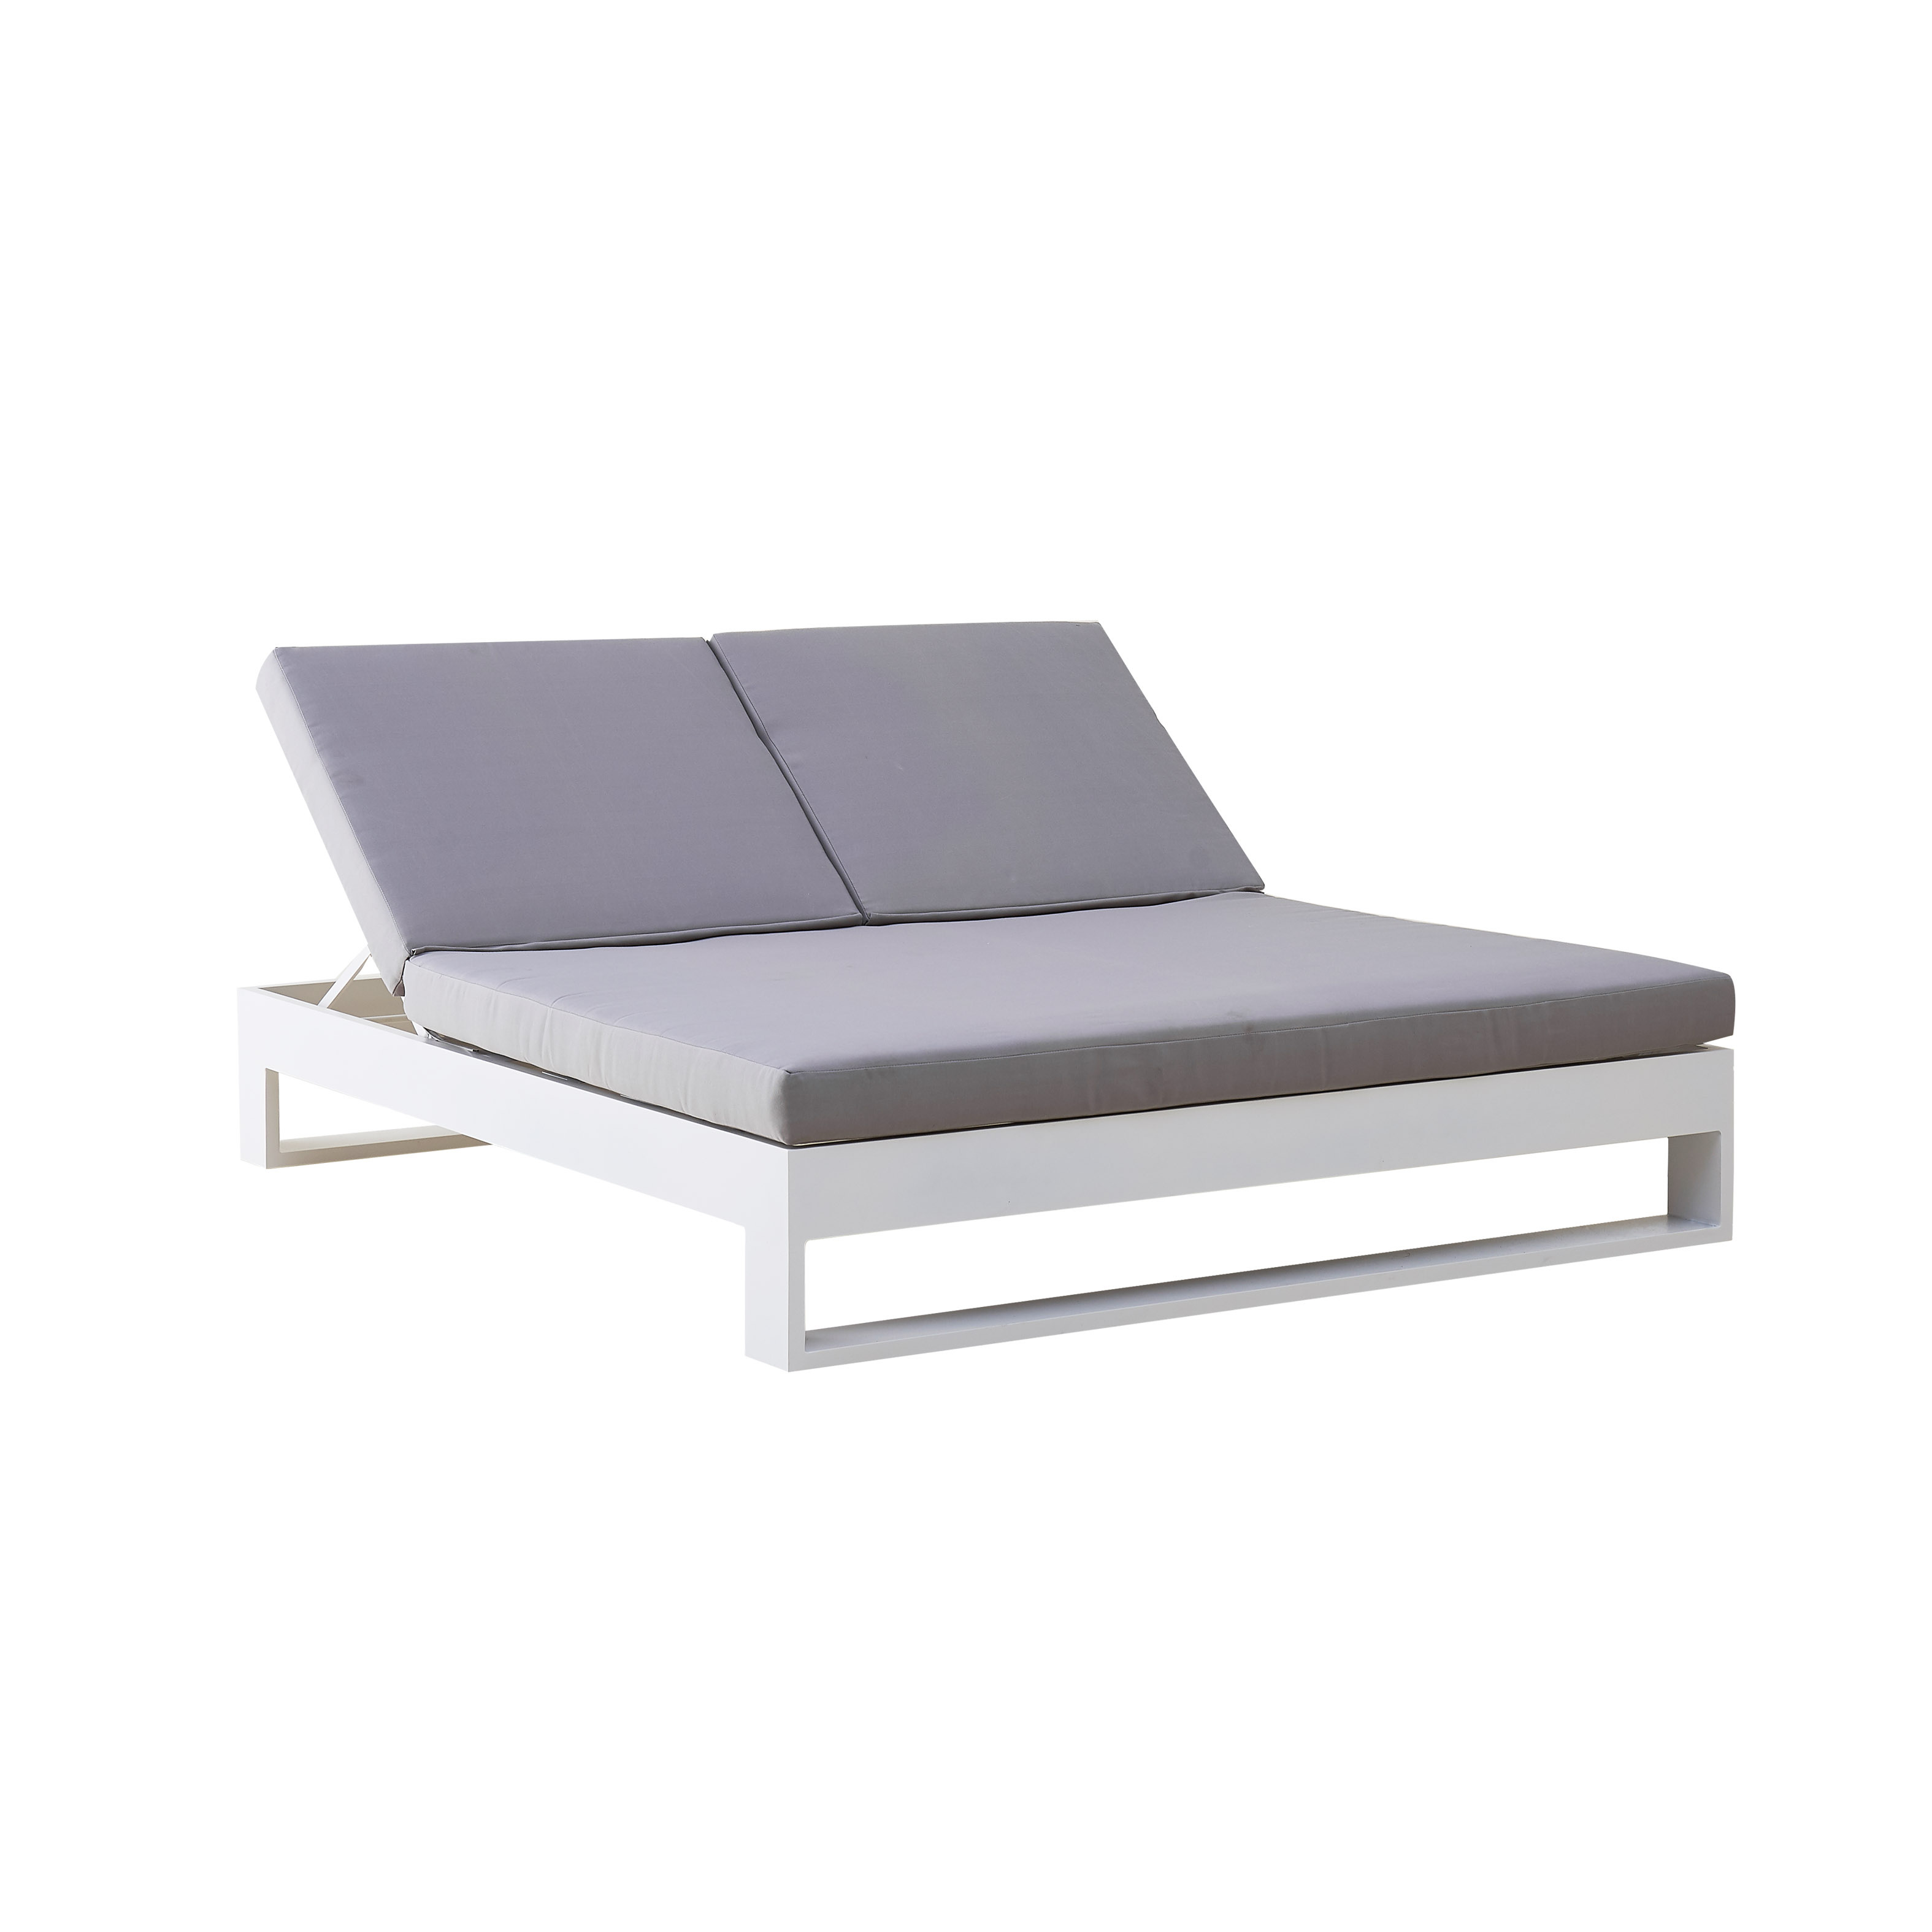 Golf kabini daybed S6